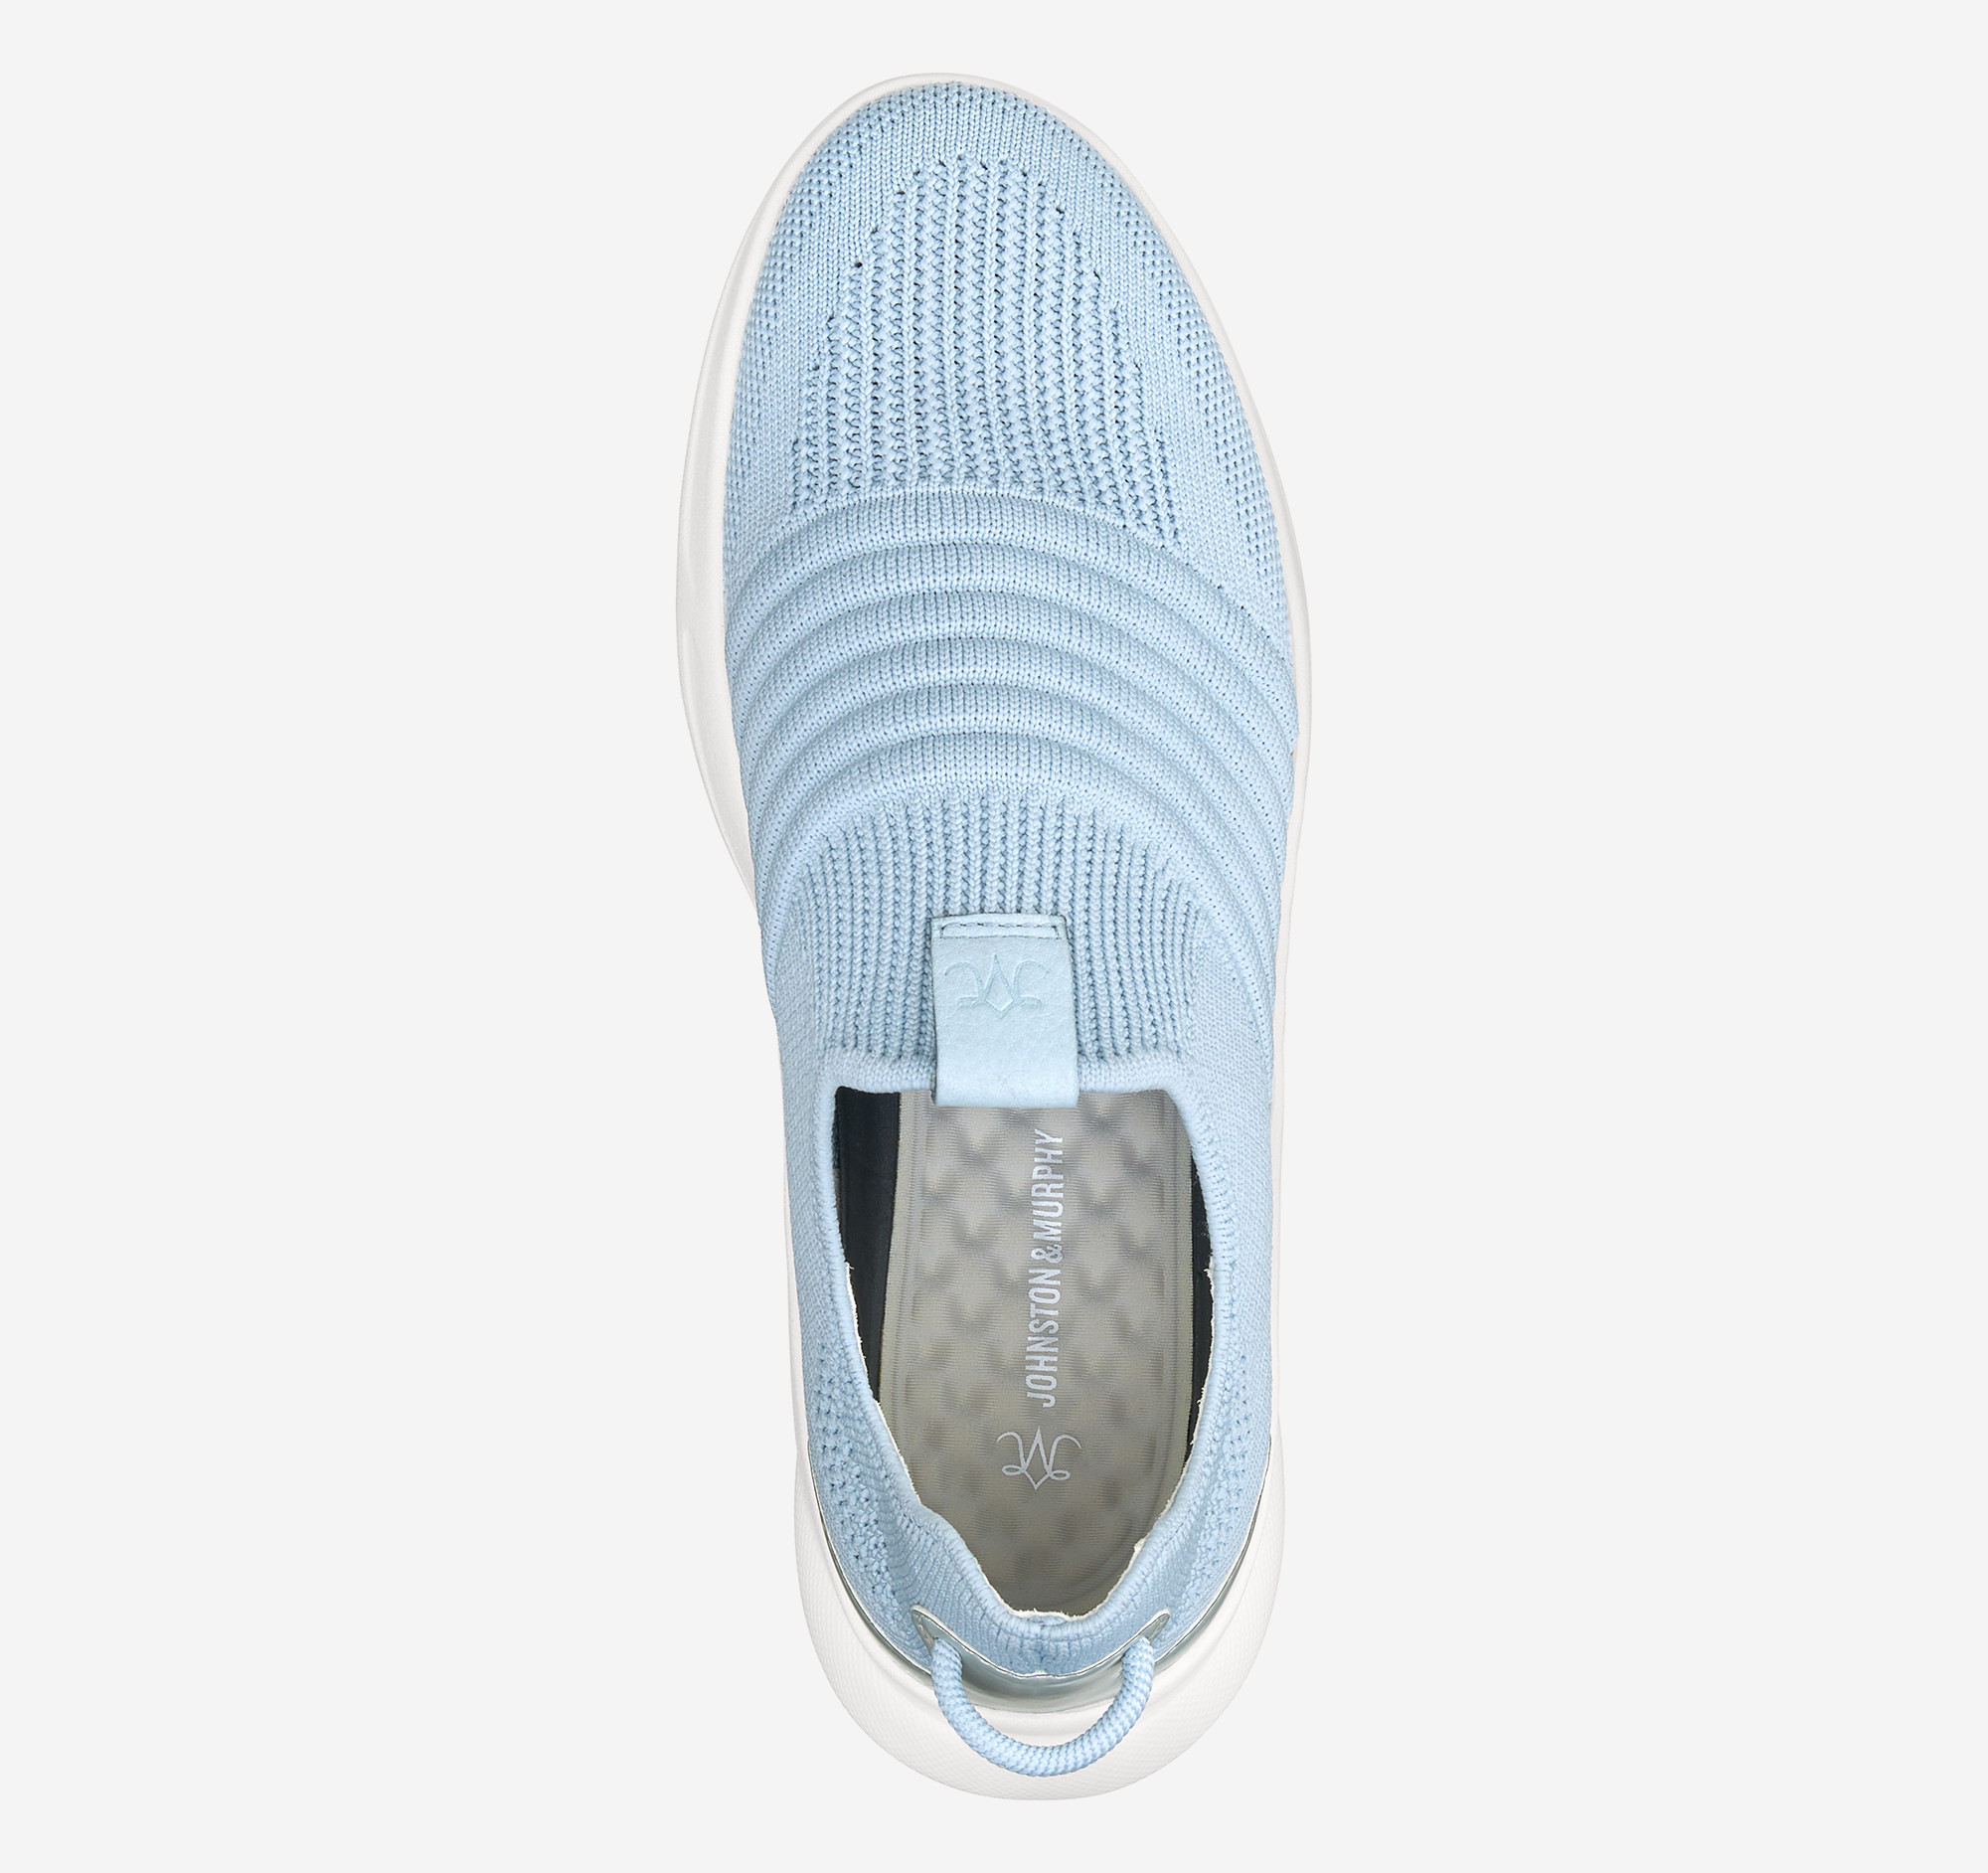 Escape Knit Slip-On image number null